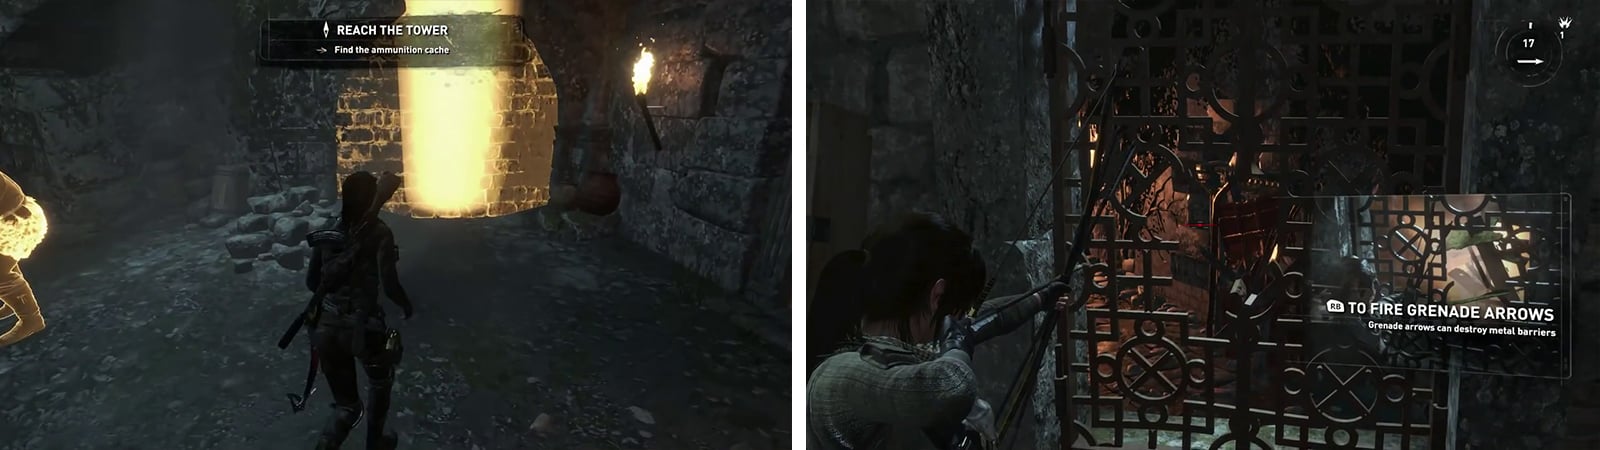 Break down the weak wall (left) and follow the passage to the Grenade Arrows. Use the Grenade Arrows to destroy the blocked door (right).